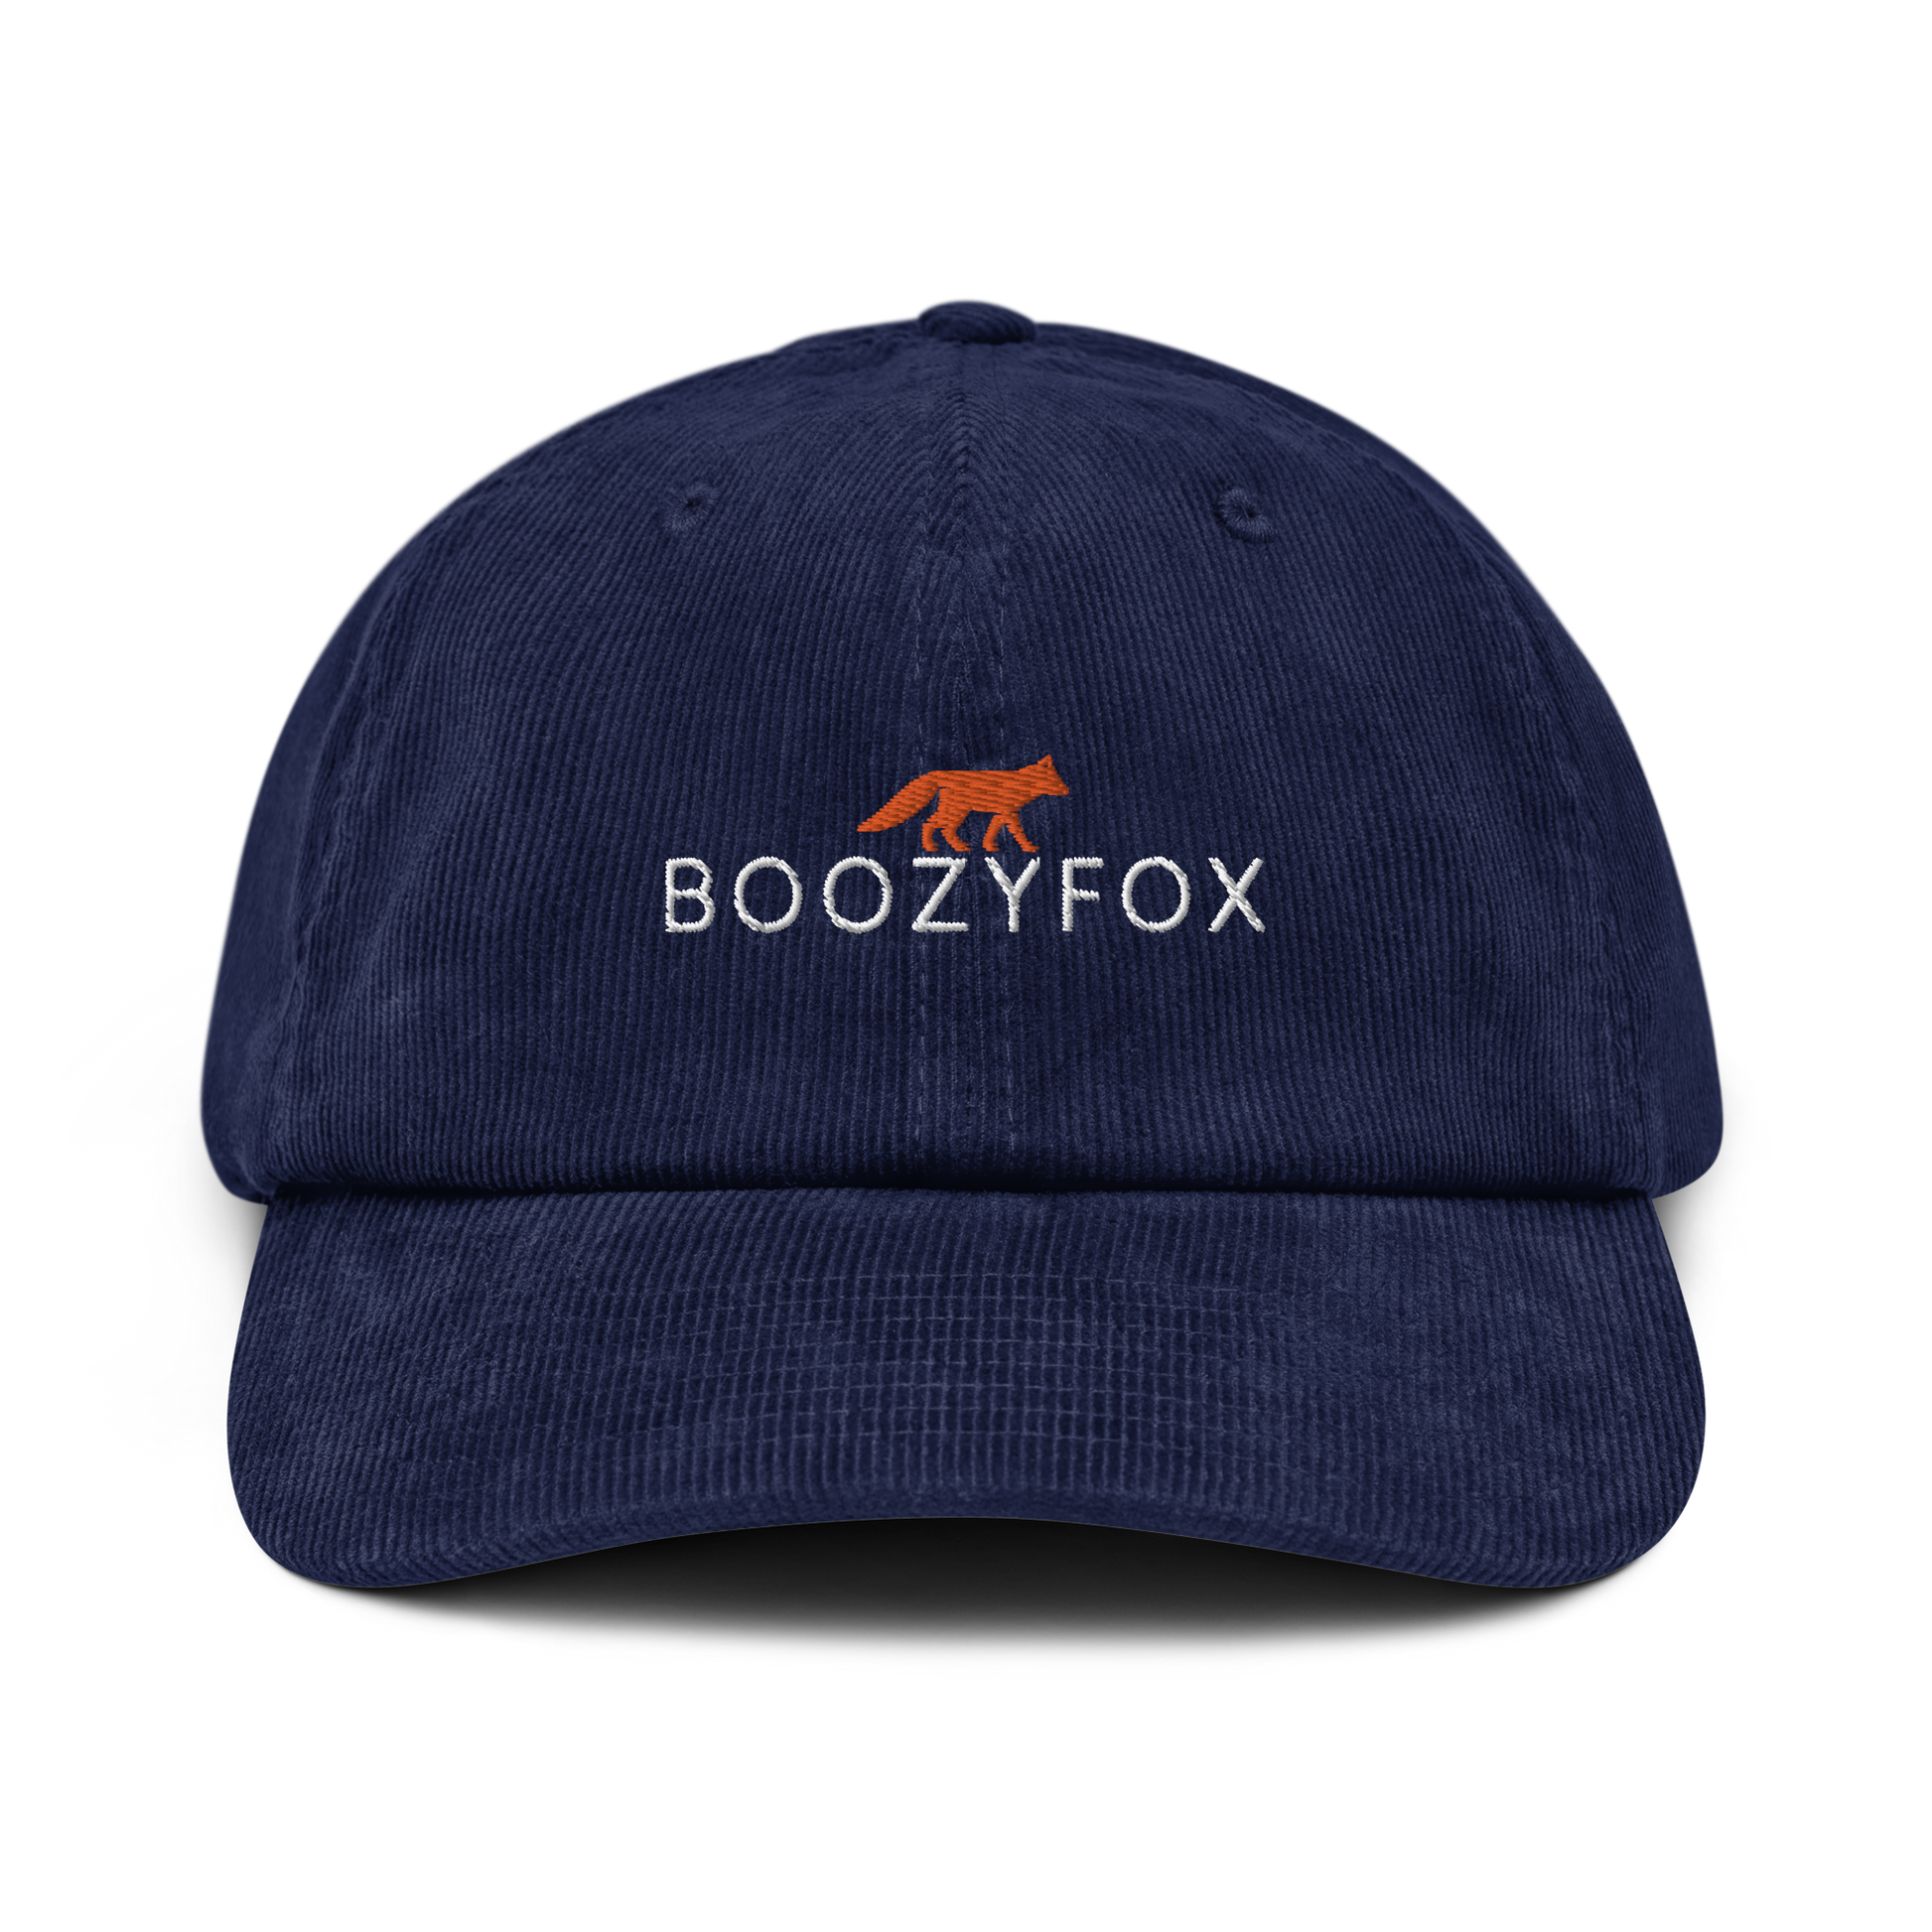 Oxford Navy Corduroy Hat featuring an embroidered Boozy Fox logo on front. Shop Cool Corduroy Hats & Corduroy Caps Online - Boozy Fox